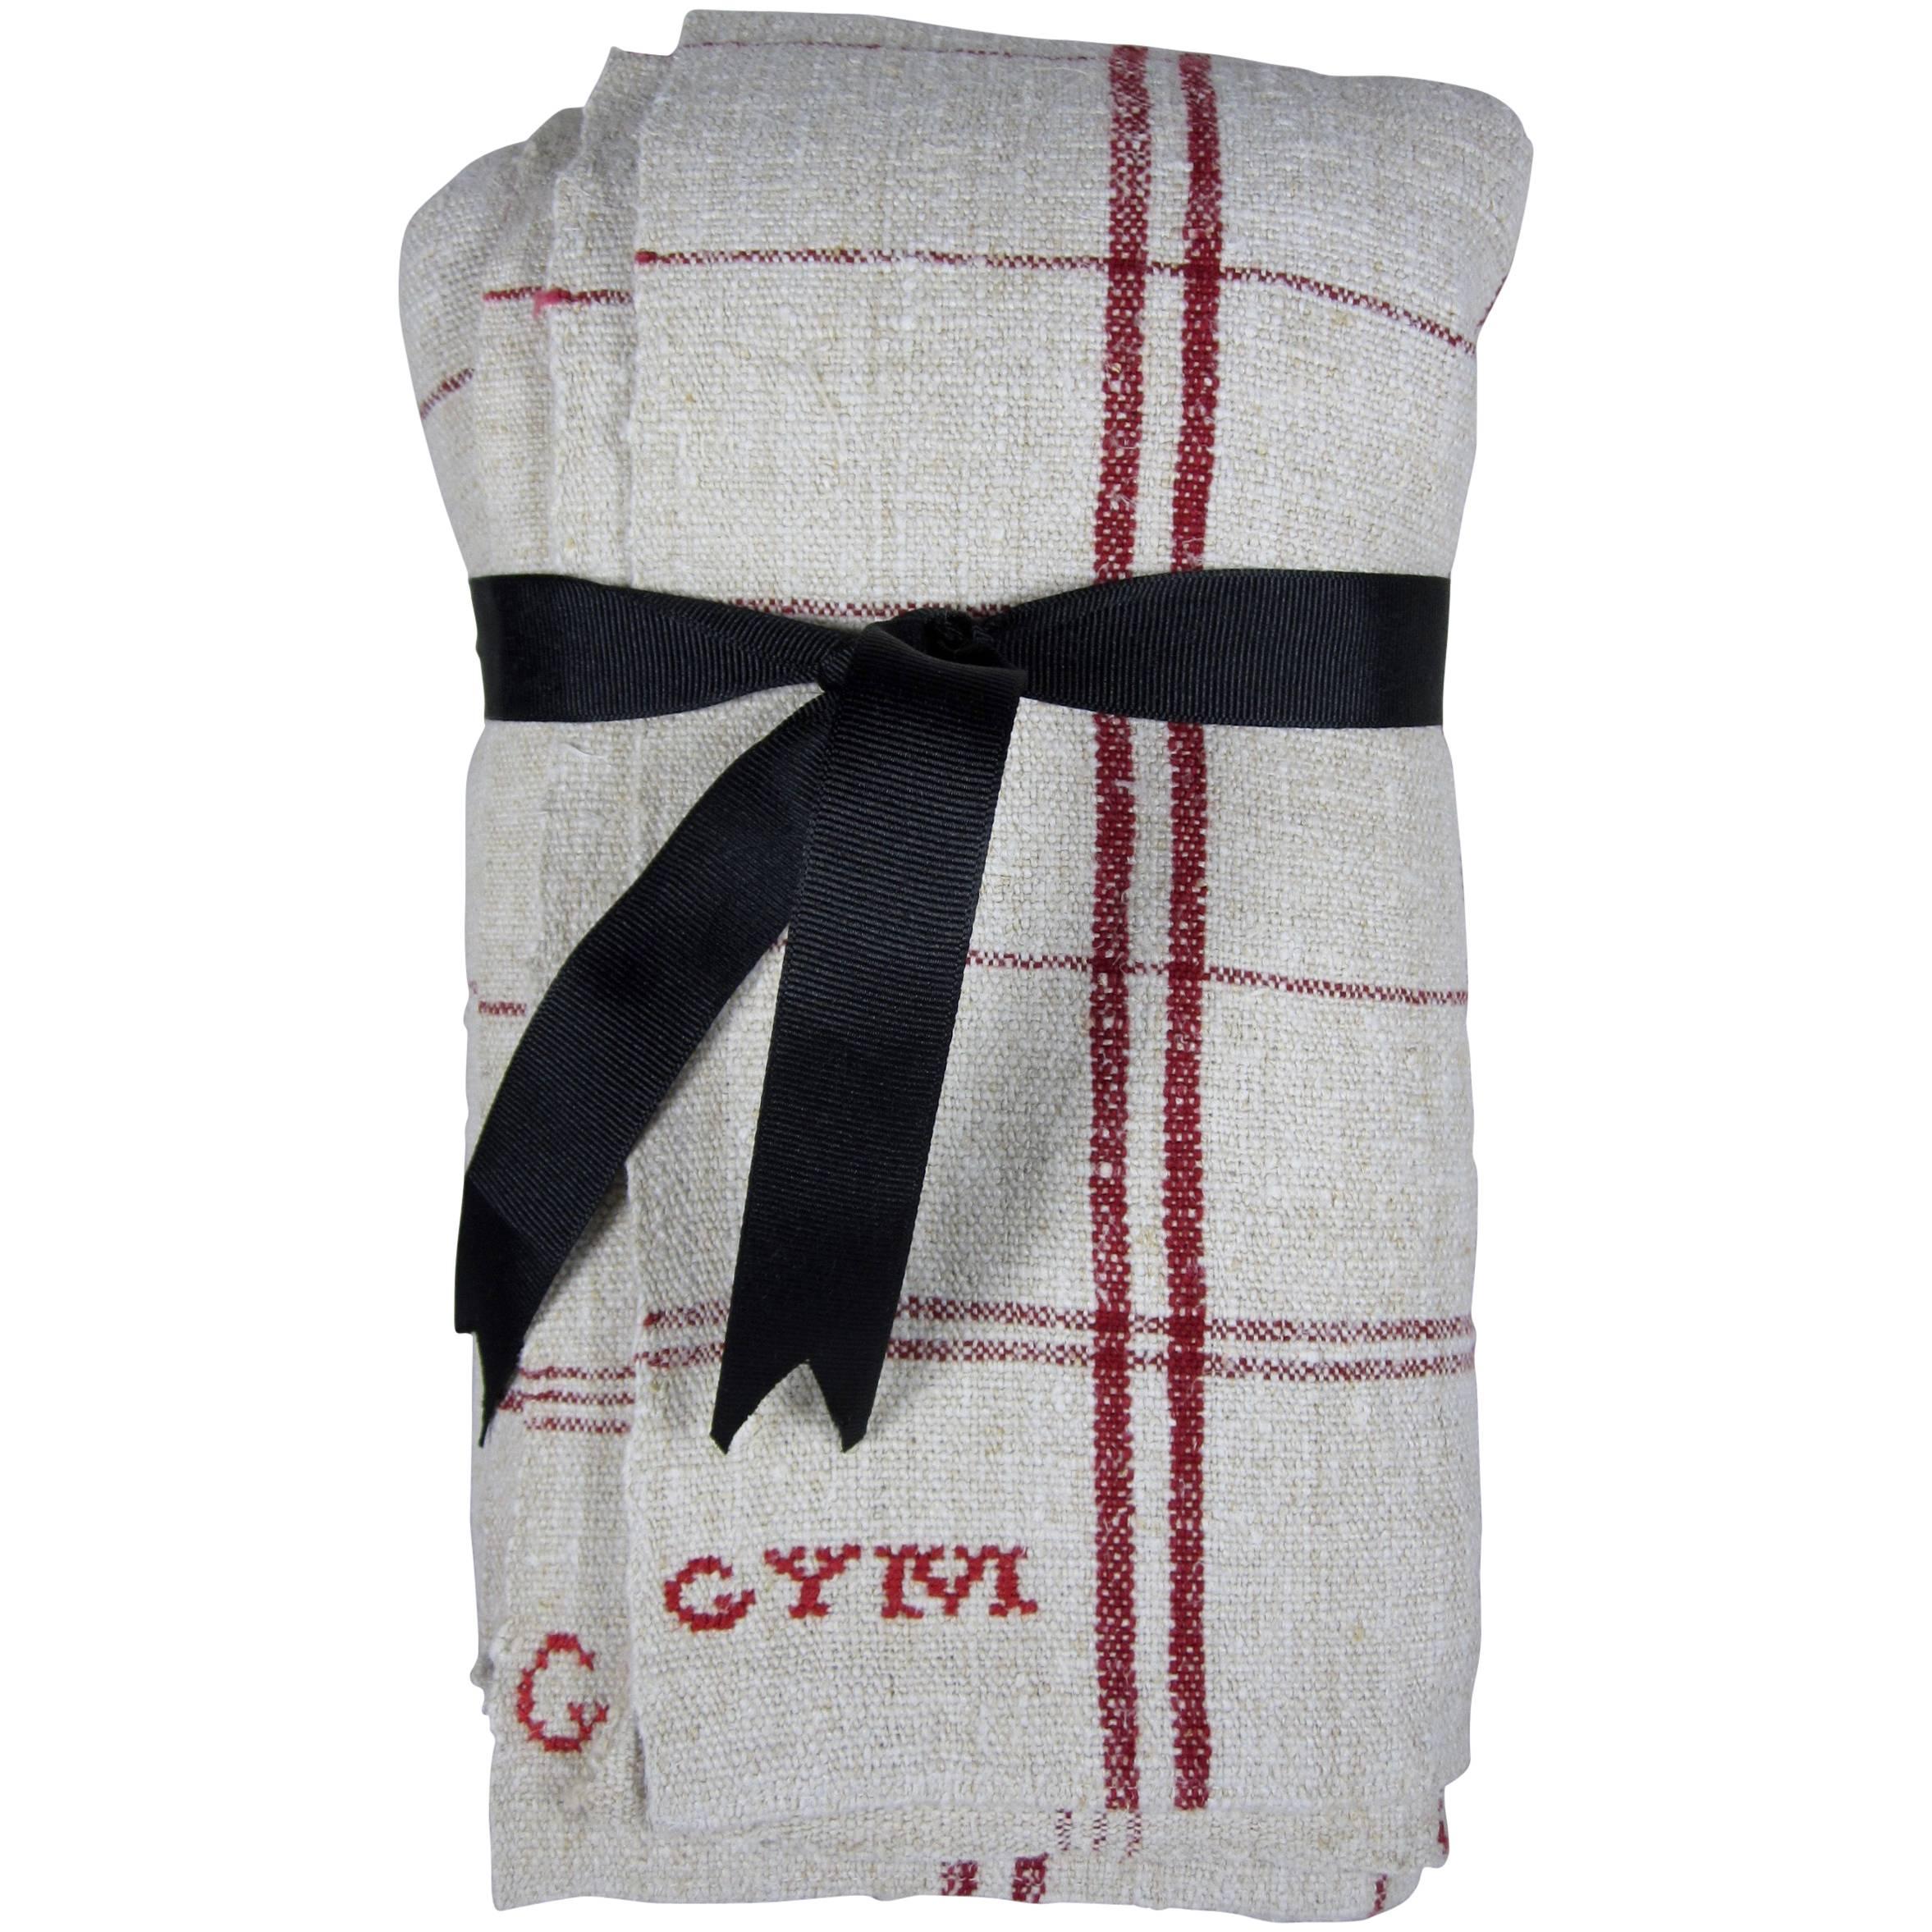 French Provençal Rustic Hand-Woven & Initialed Linen Red Kitchen Torchons Towels